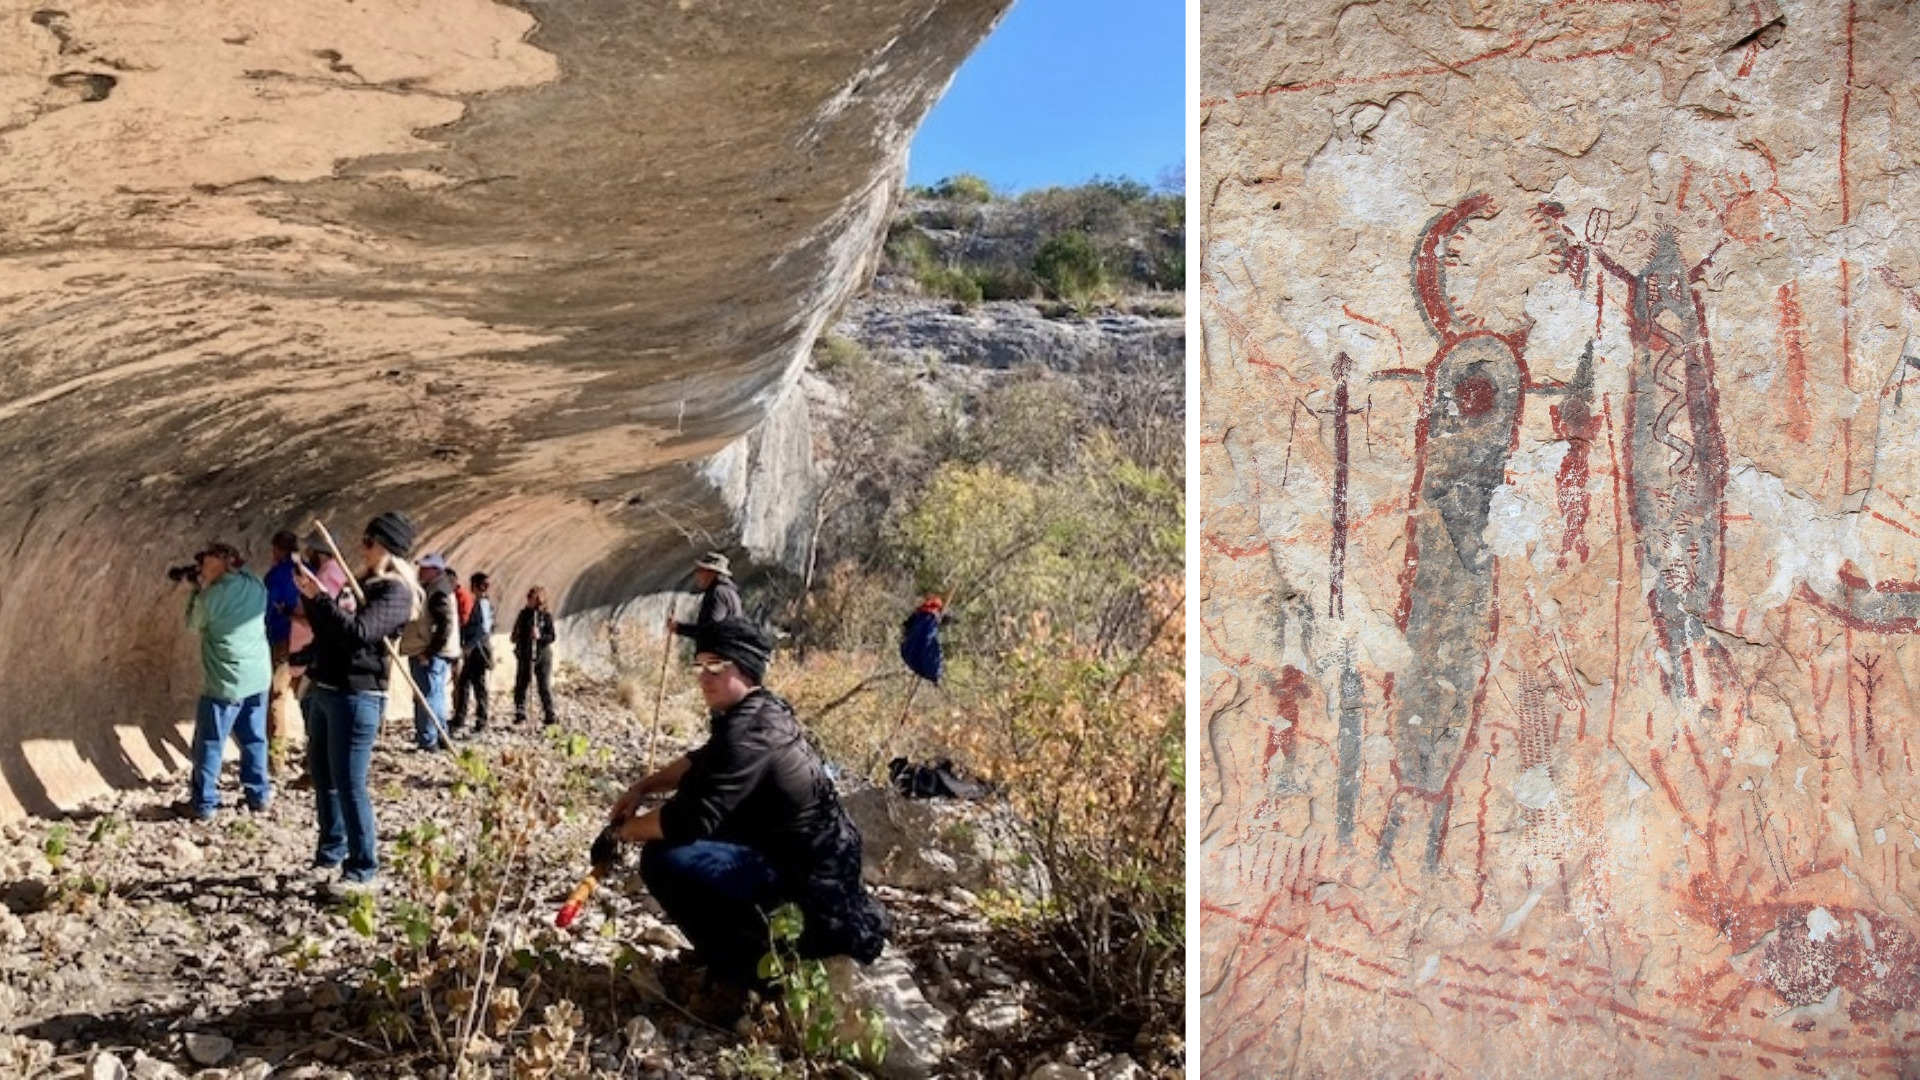 group of hikers in rock shelter next to photo of anthropomorphic rock art drawings.